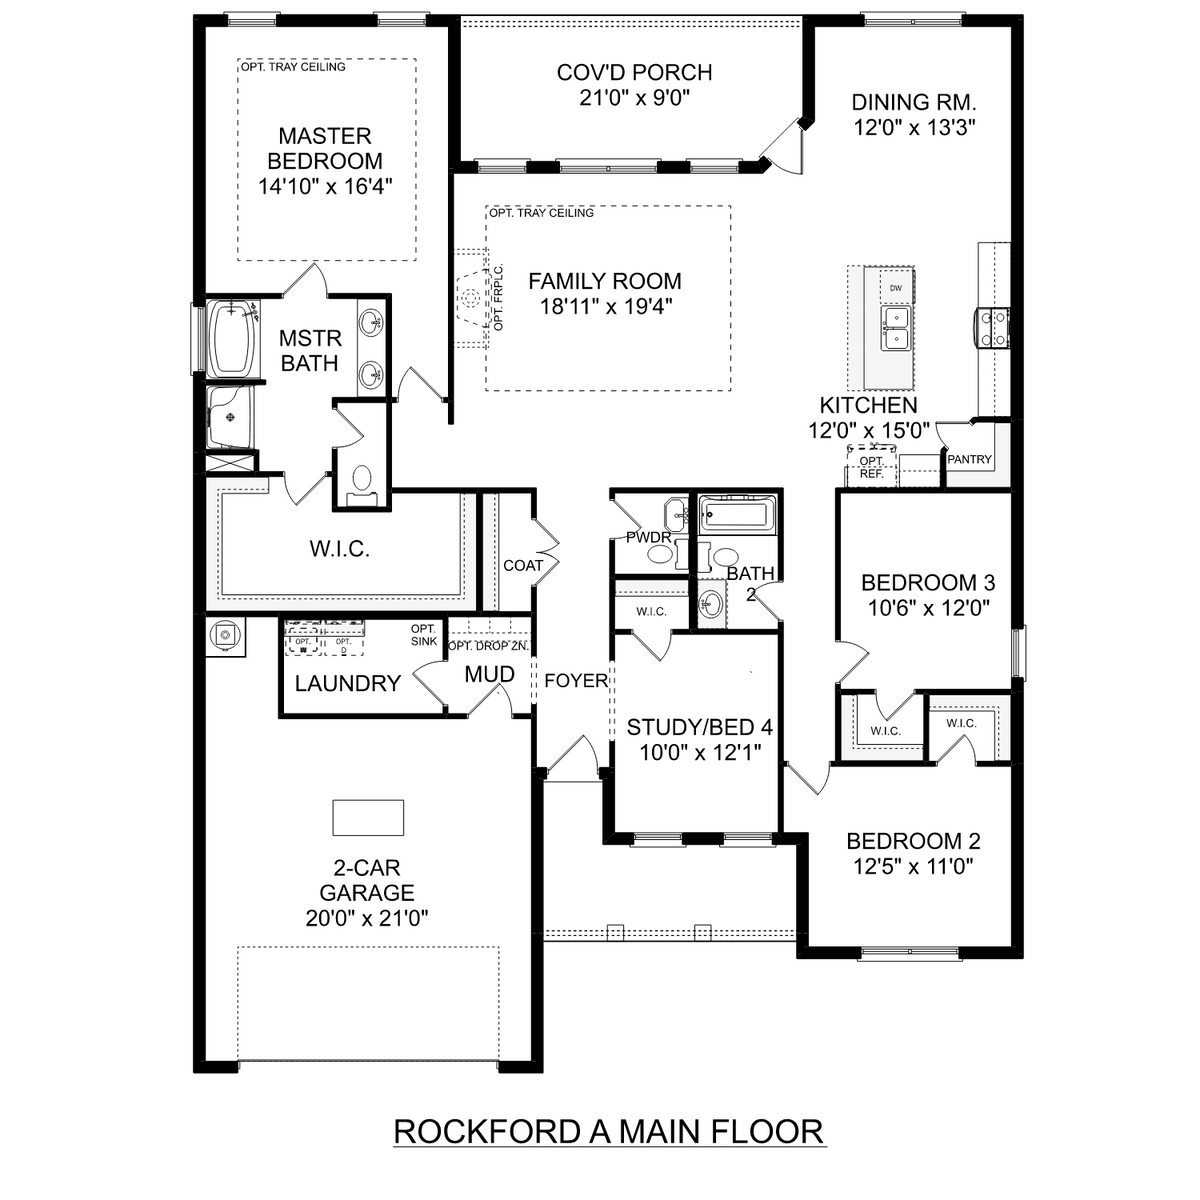 1 - The Rockford buildable floor plan layout in Davidson Homes' Kendall Downs community.